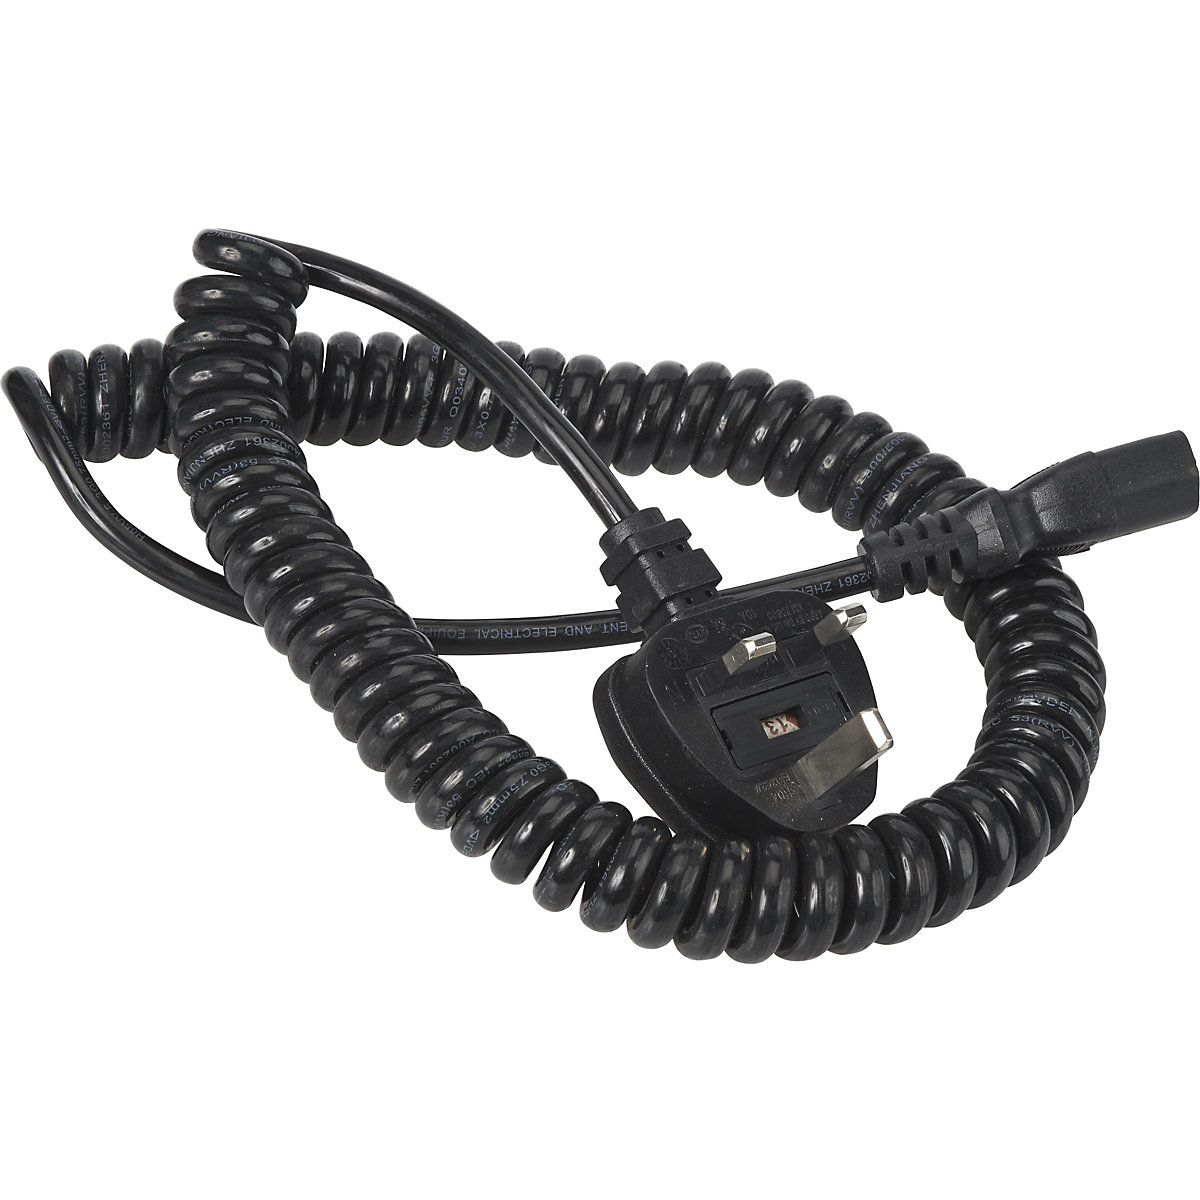 Mains cable with cold device plug